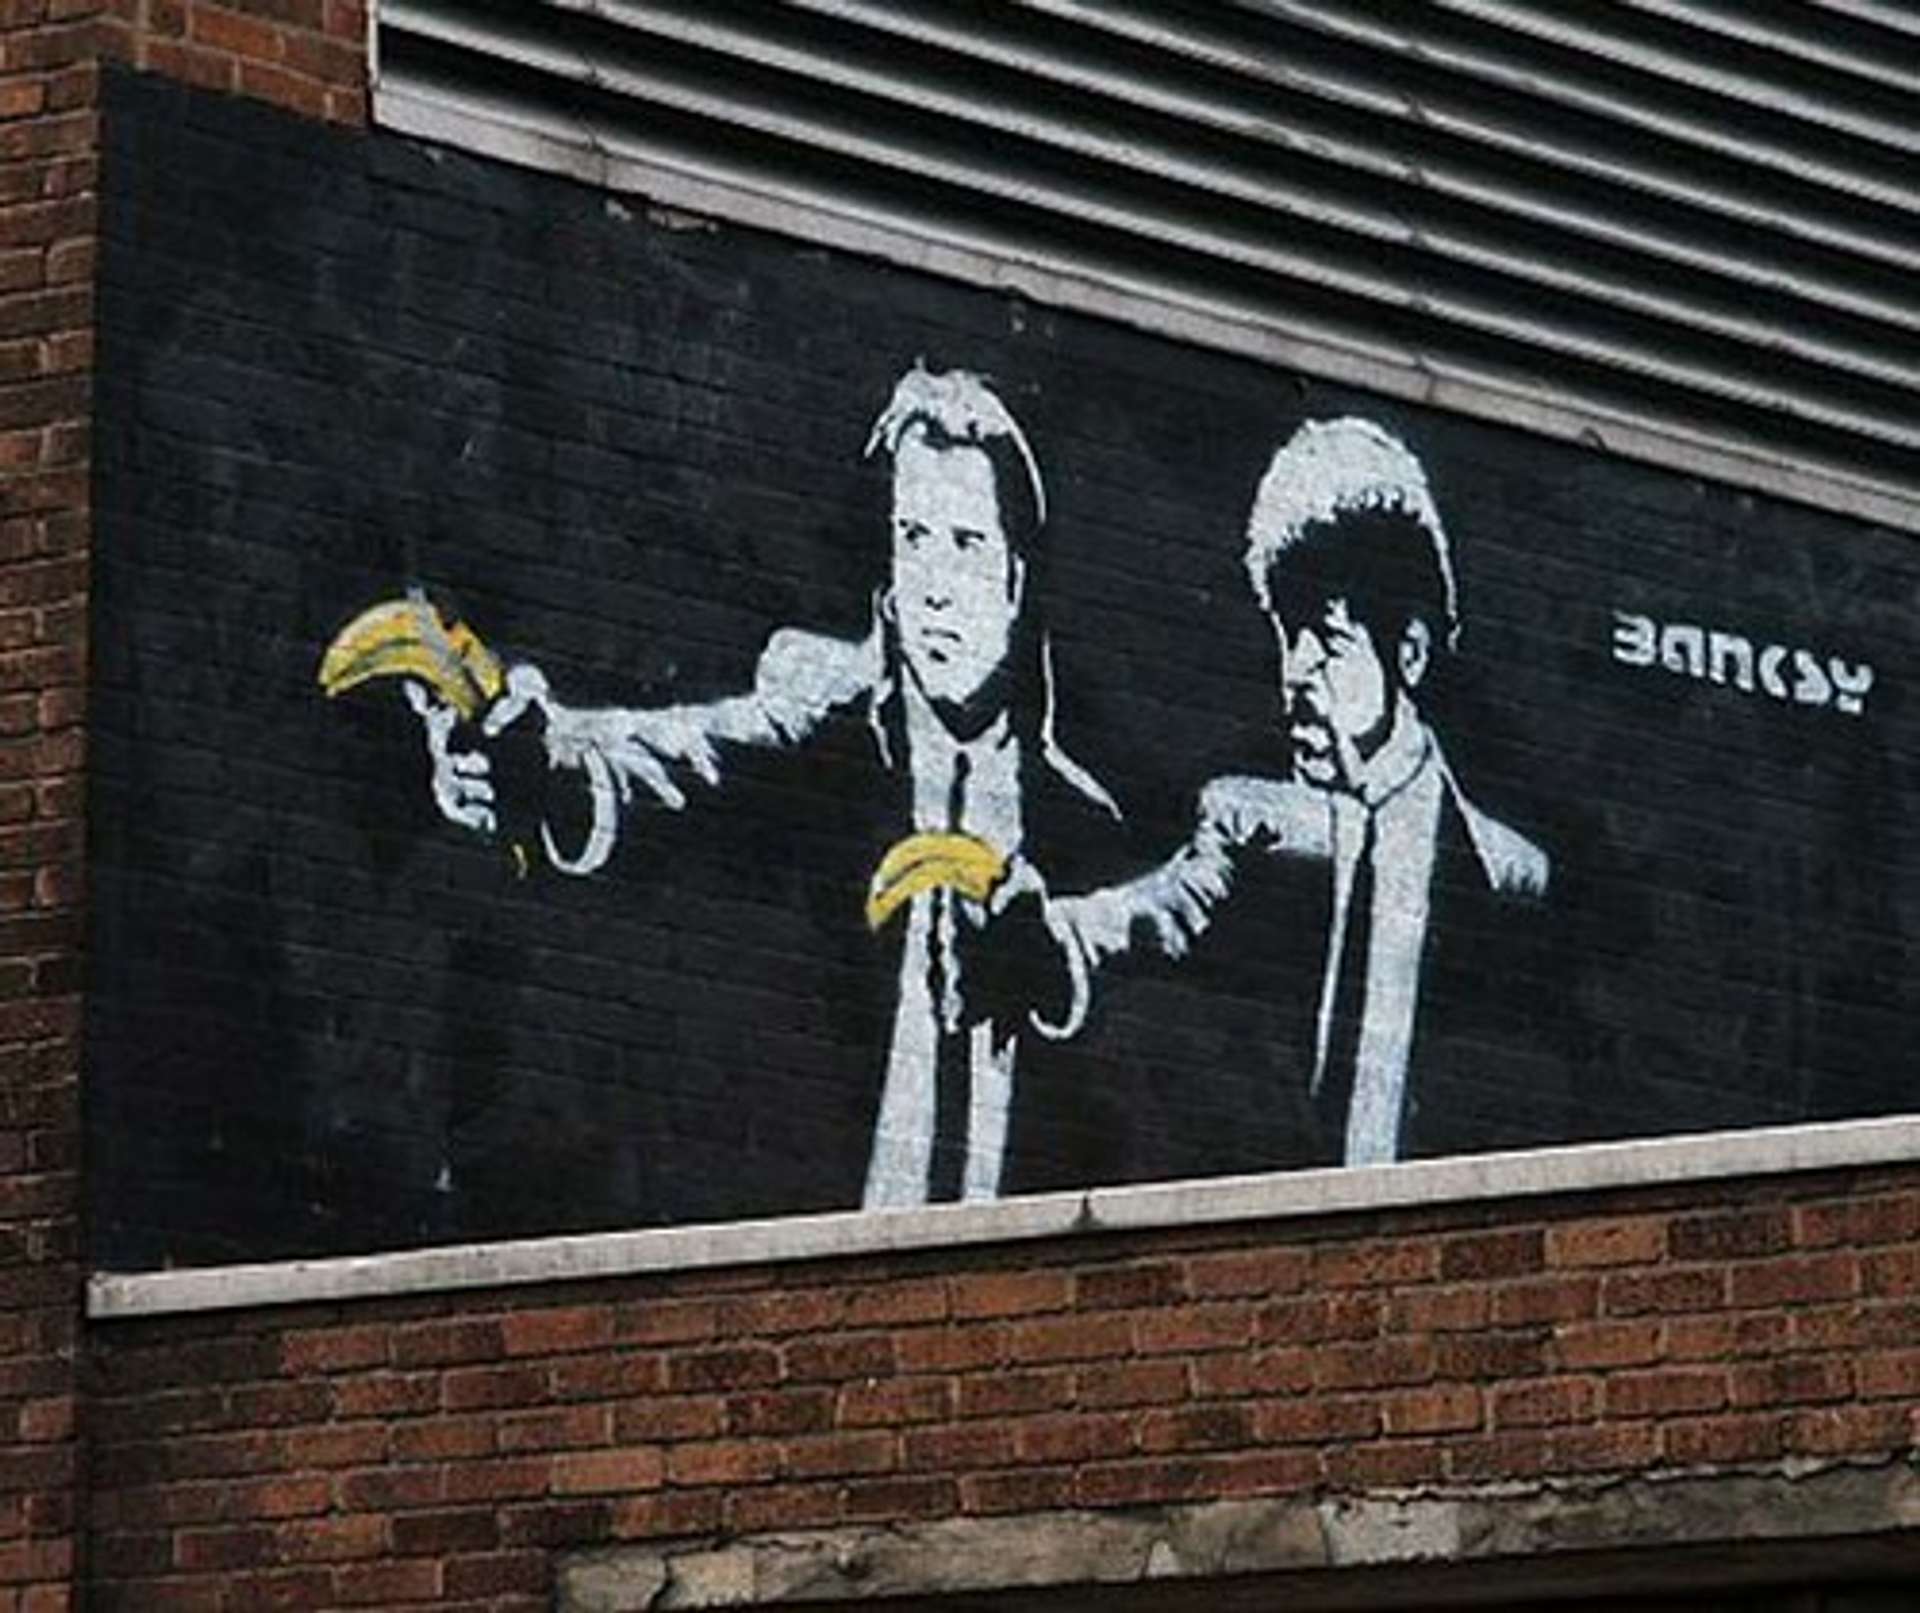 Pulp Fiction by Banksy - © Bruce'sArtCollection